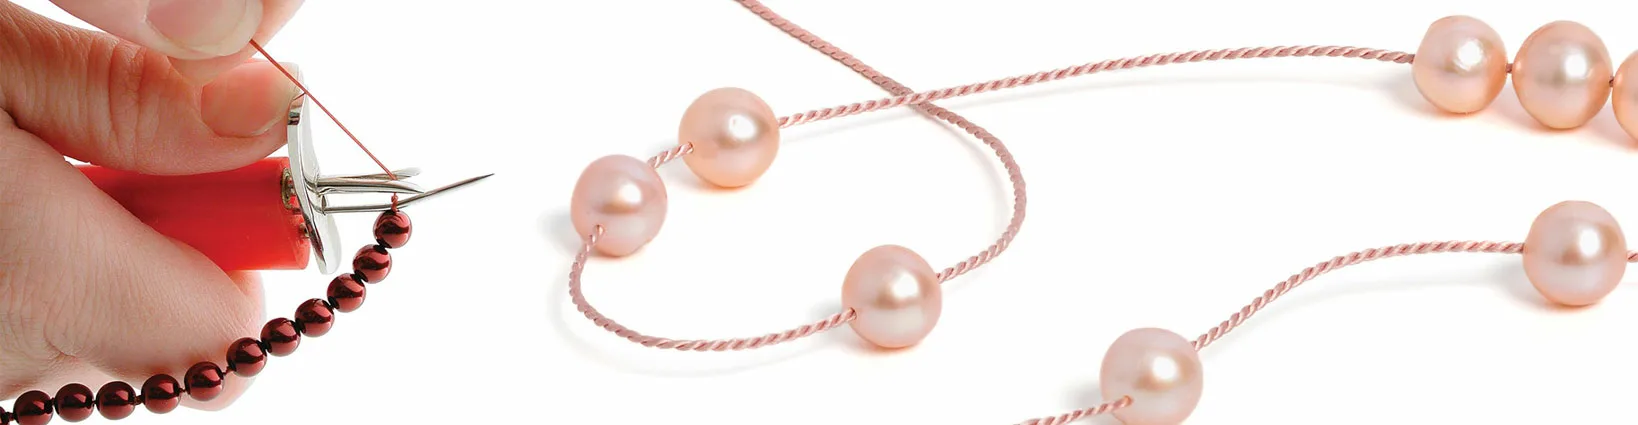 Pearl-Knotting